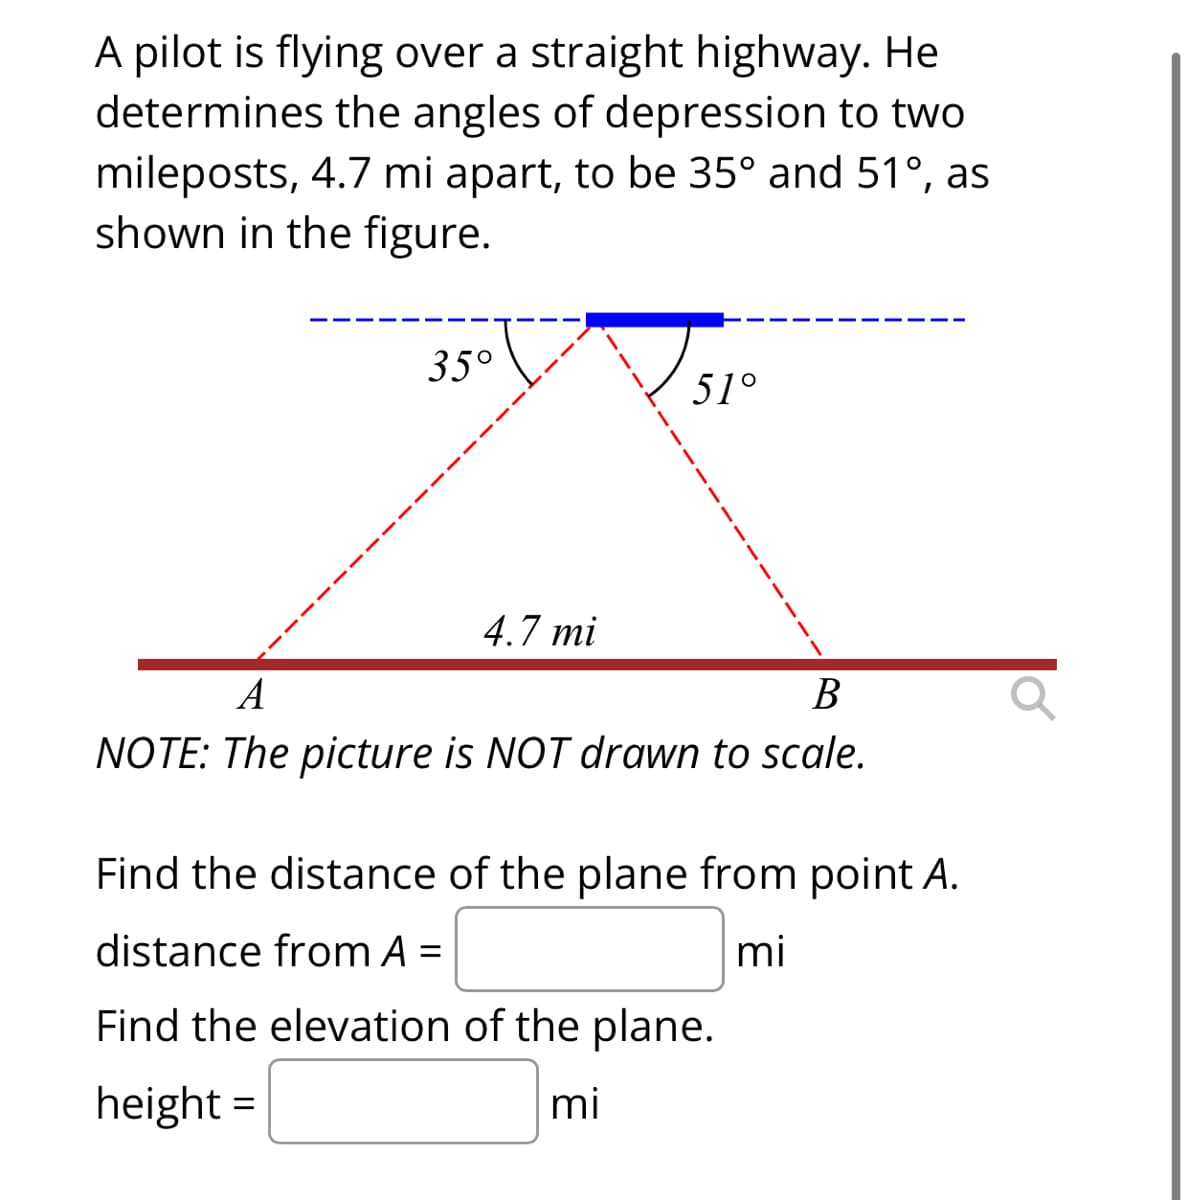 A pilot is flying over a straight highway. He
determines the angles of depression to two
mileposts, 4.7 mi apart, to be 35° and 51°, as
shown in the figure.
35°
4.7 mi
51°
1
A
B
NOTE: The picture is NOT drawn to scale.
Find the distance of the plane from point A.
distance from A =
mi
Find the elevation of the plane.
height=
mi